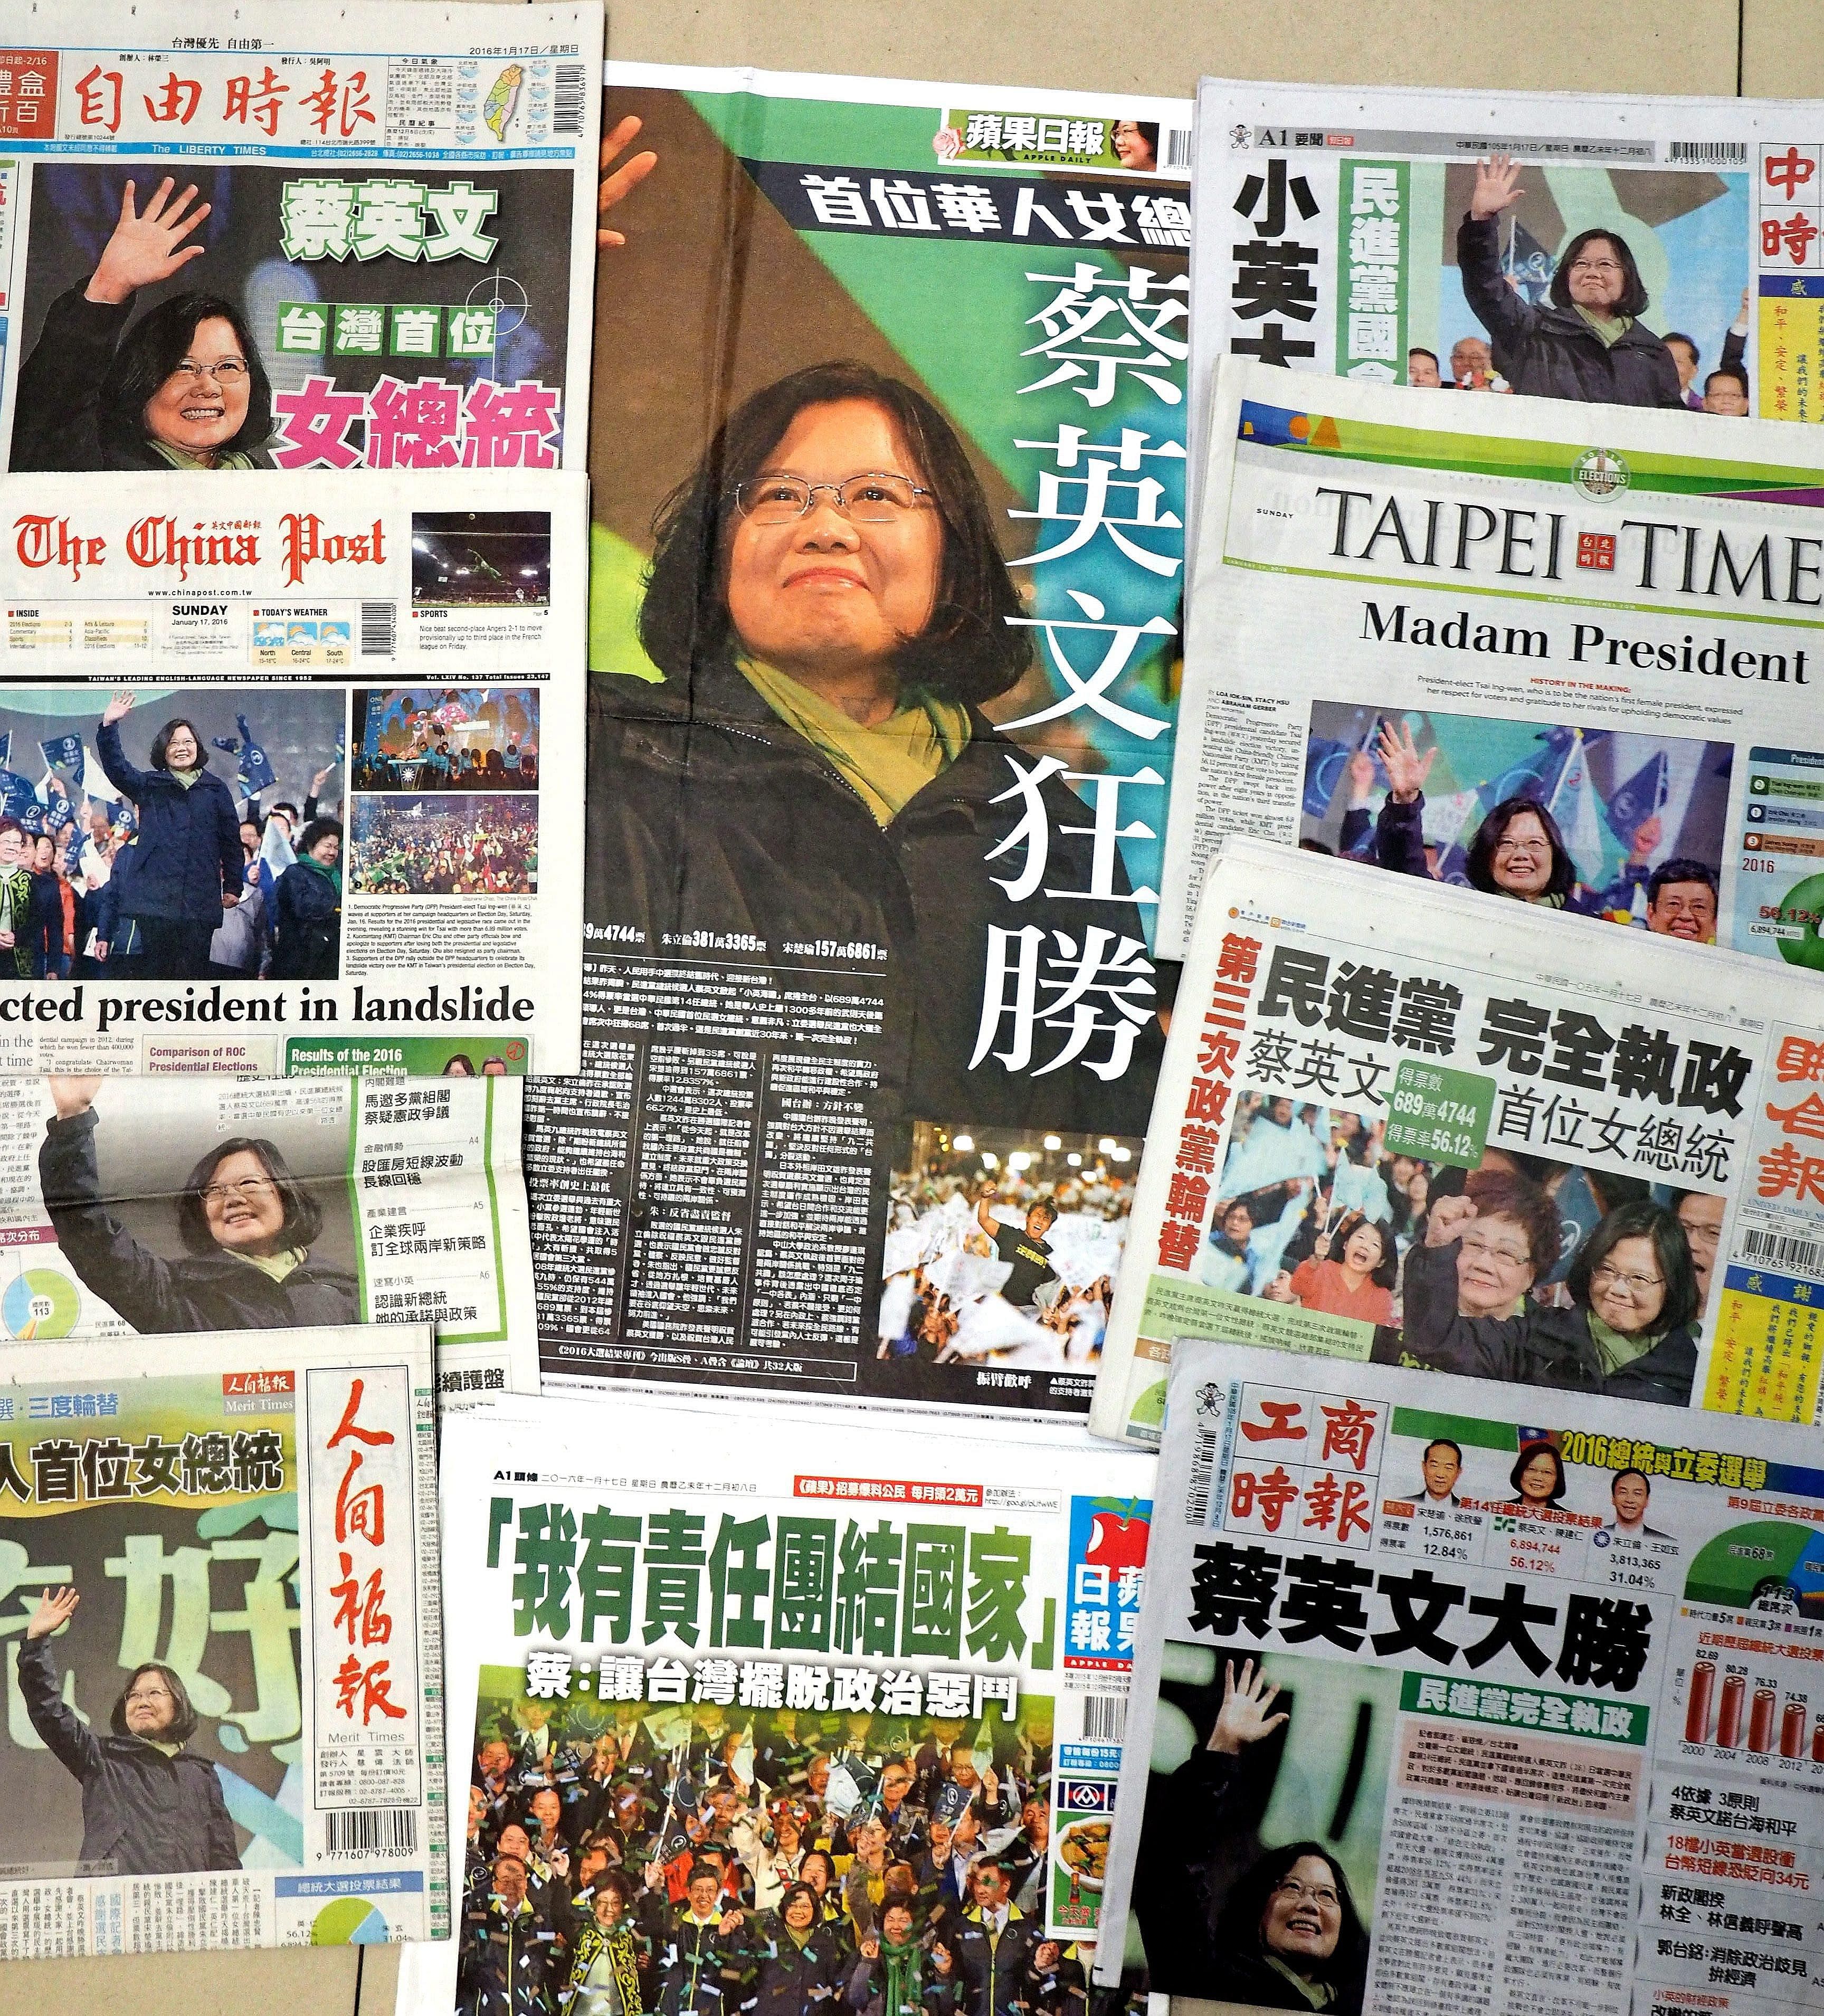 Taiwanese newspapers' front pages yesterday reporting on opposition leader Tsai Ing-wen's presidential election win.